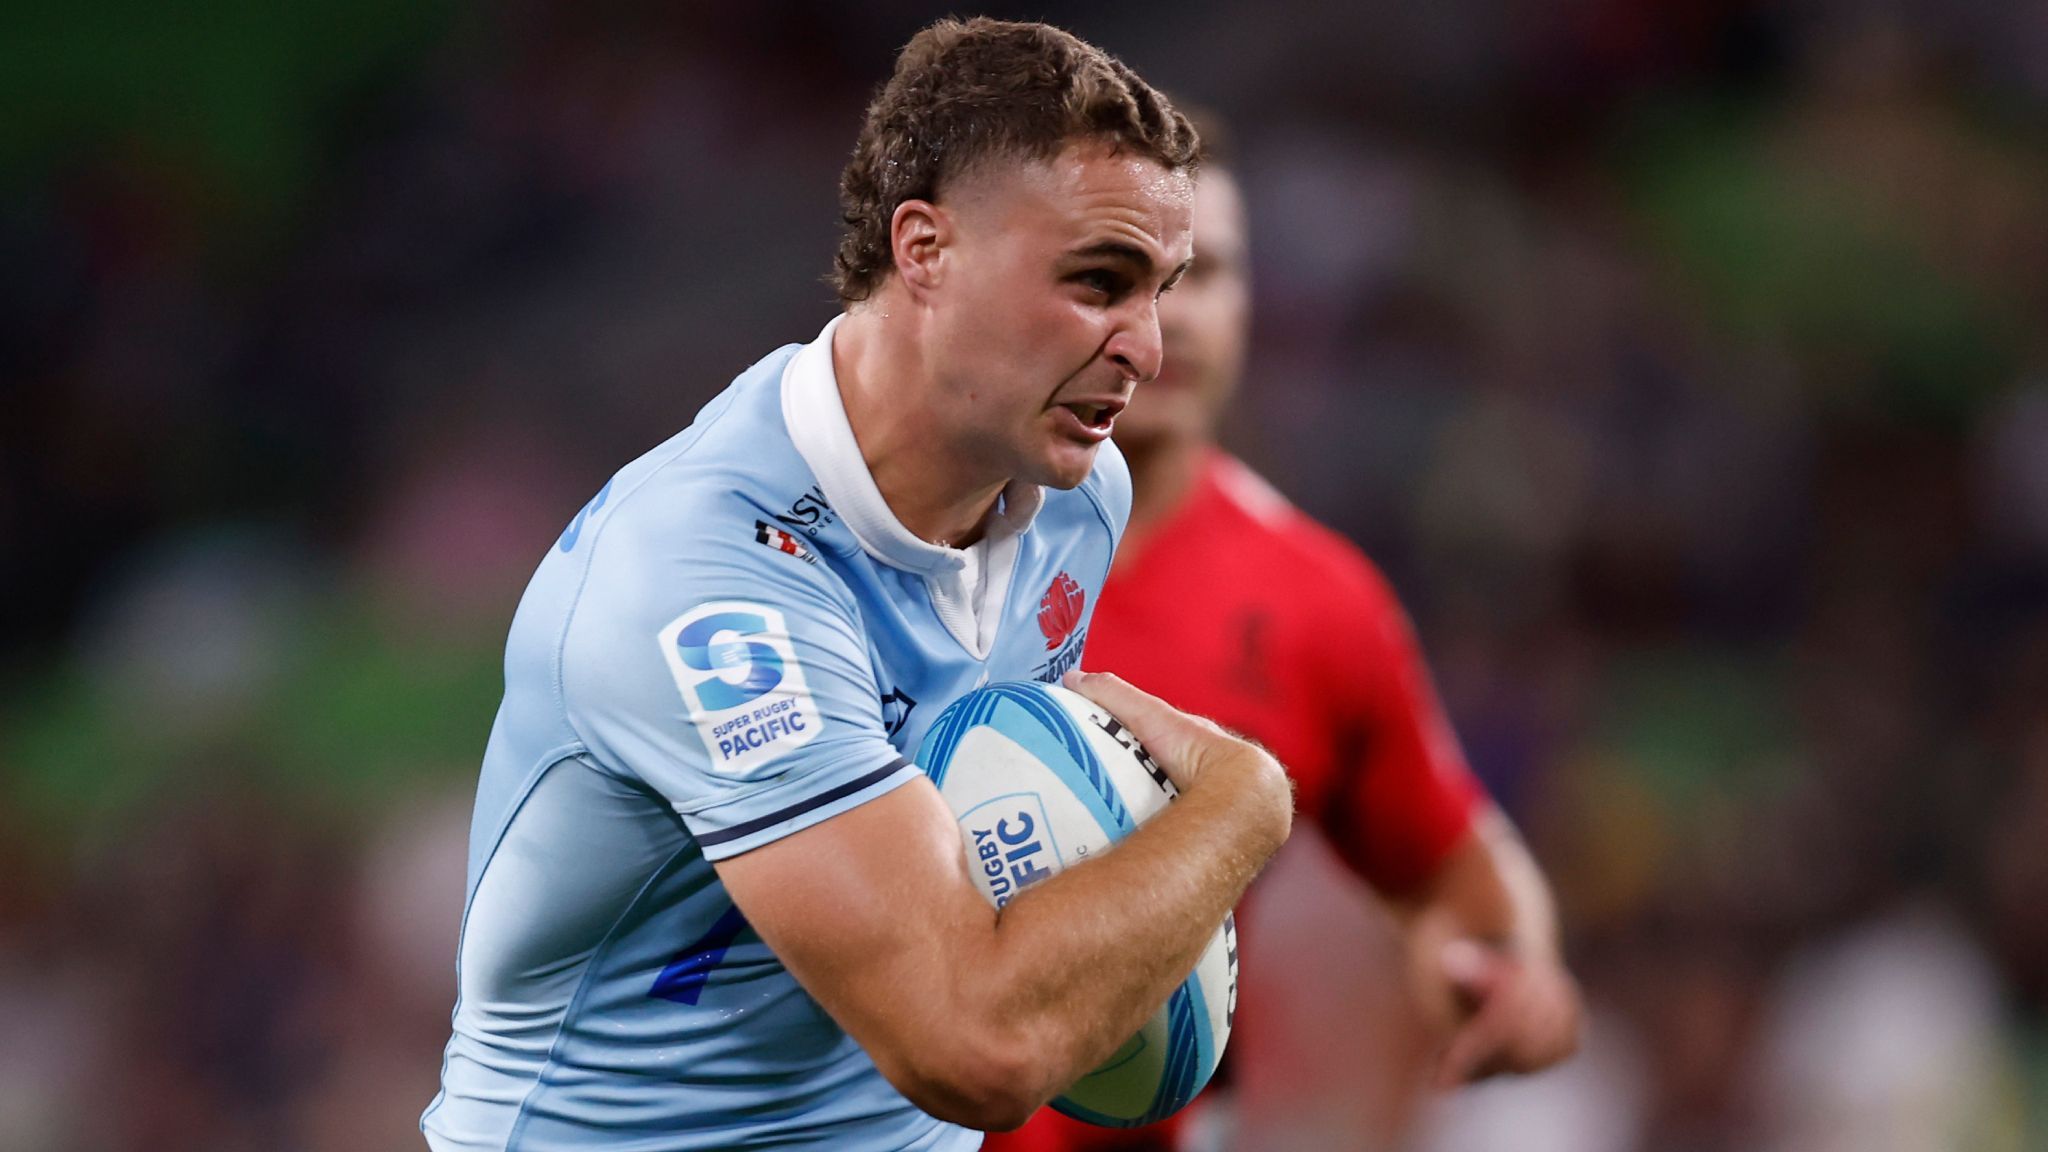 Centre Harry WIlson playing for NSW Warratahs